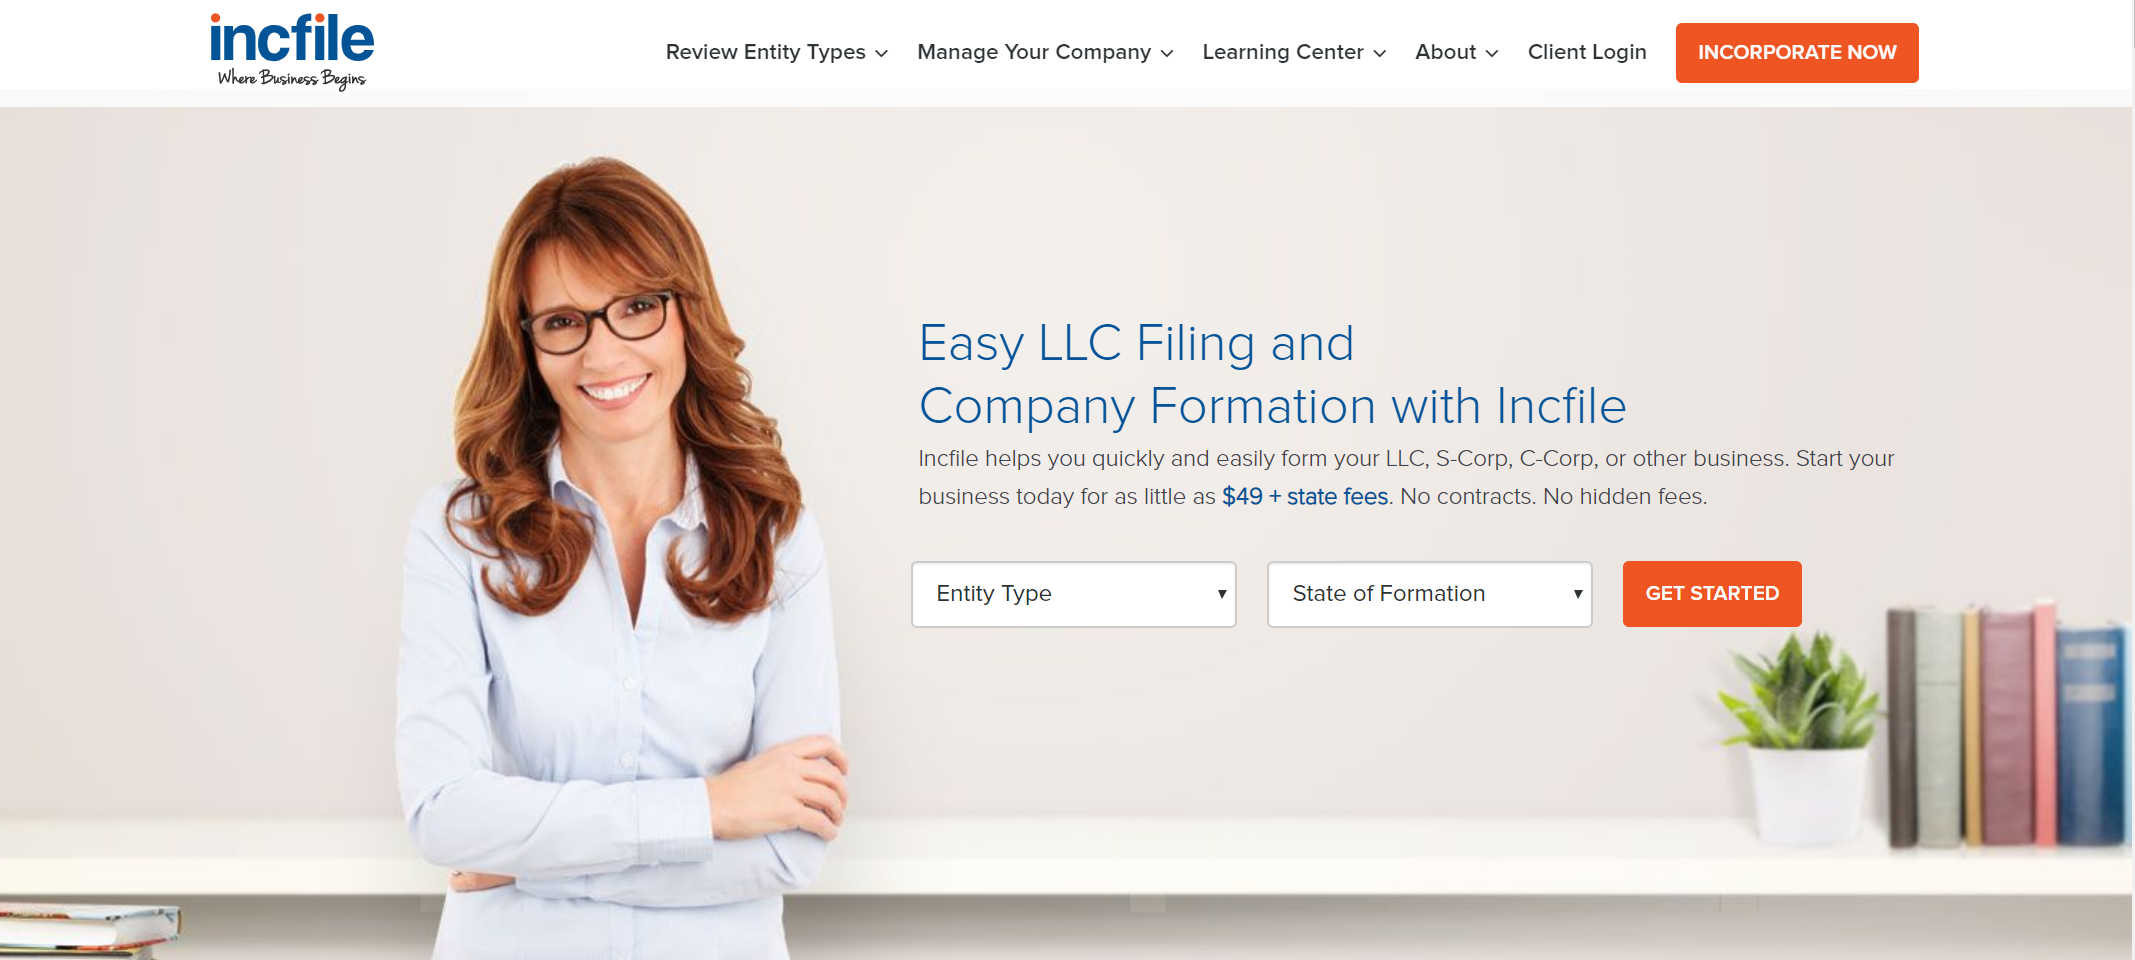 Incfile Review LLC formation. Northwest registered agent. Us Company formation. Register your Company quick and easy. State formation